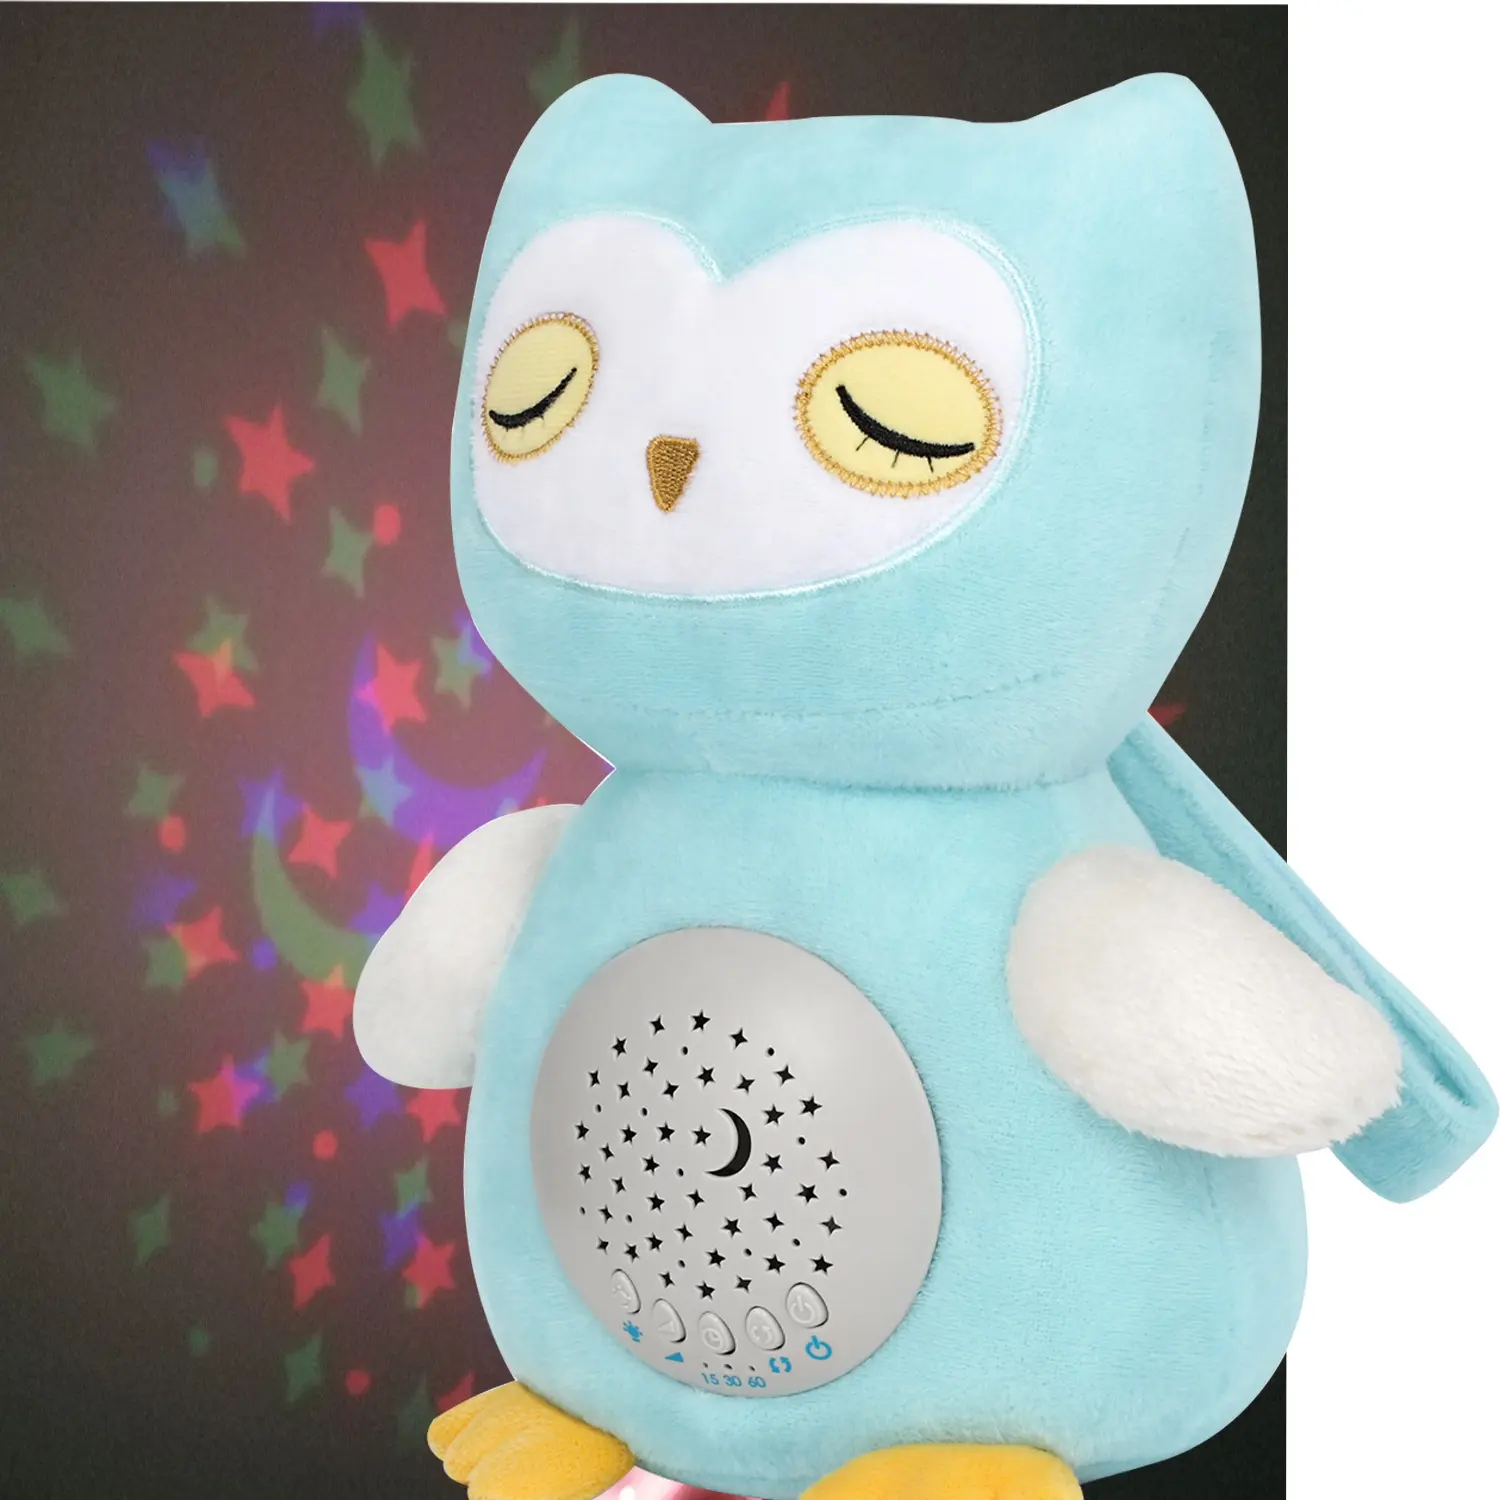 (AKTE Patent) Summer Infant Little Heartbeats Soother Owl Plush Toy With Star Projector White Noise Machine